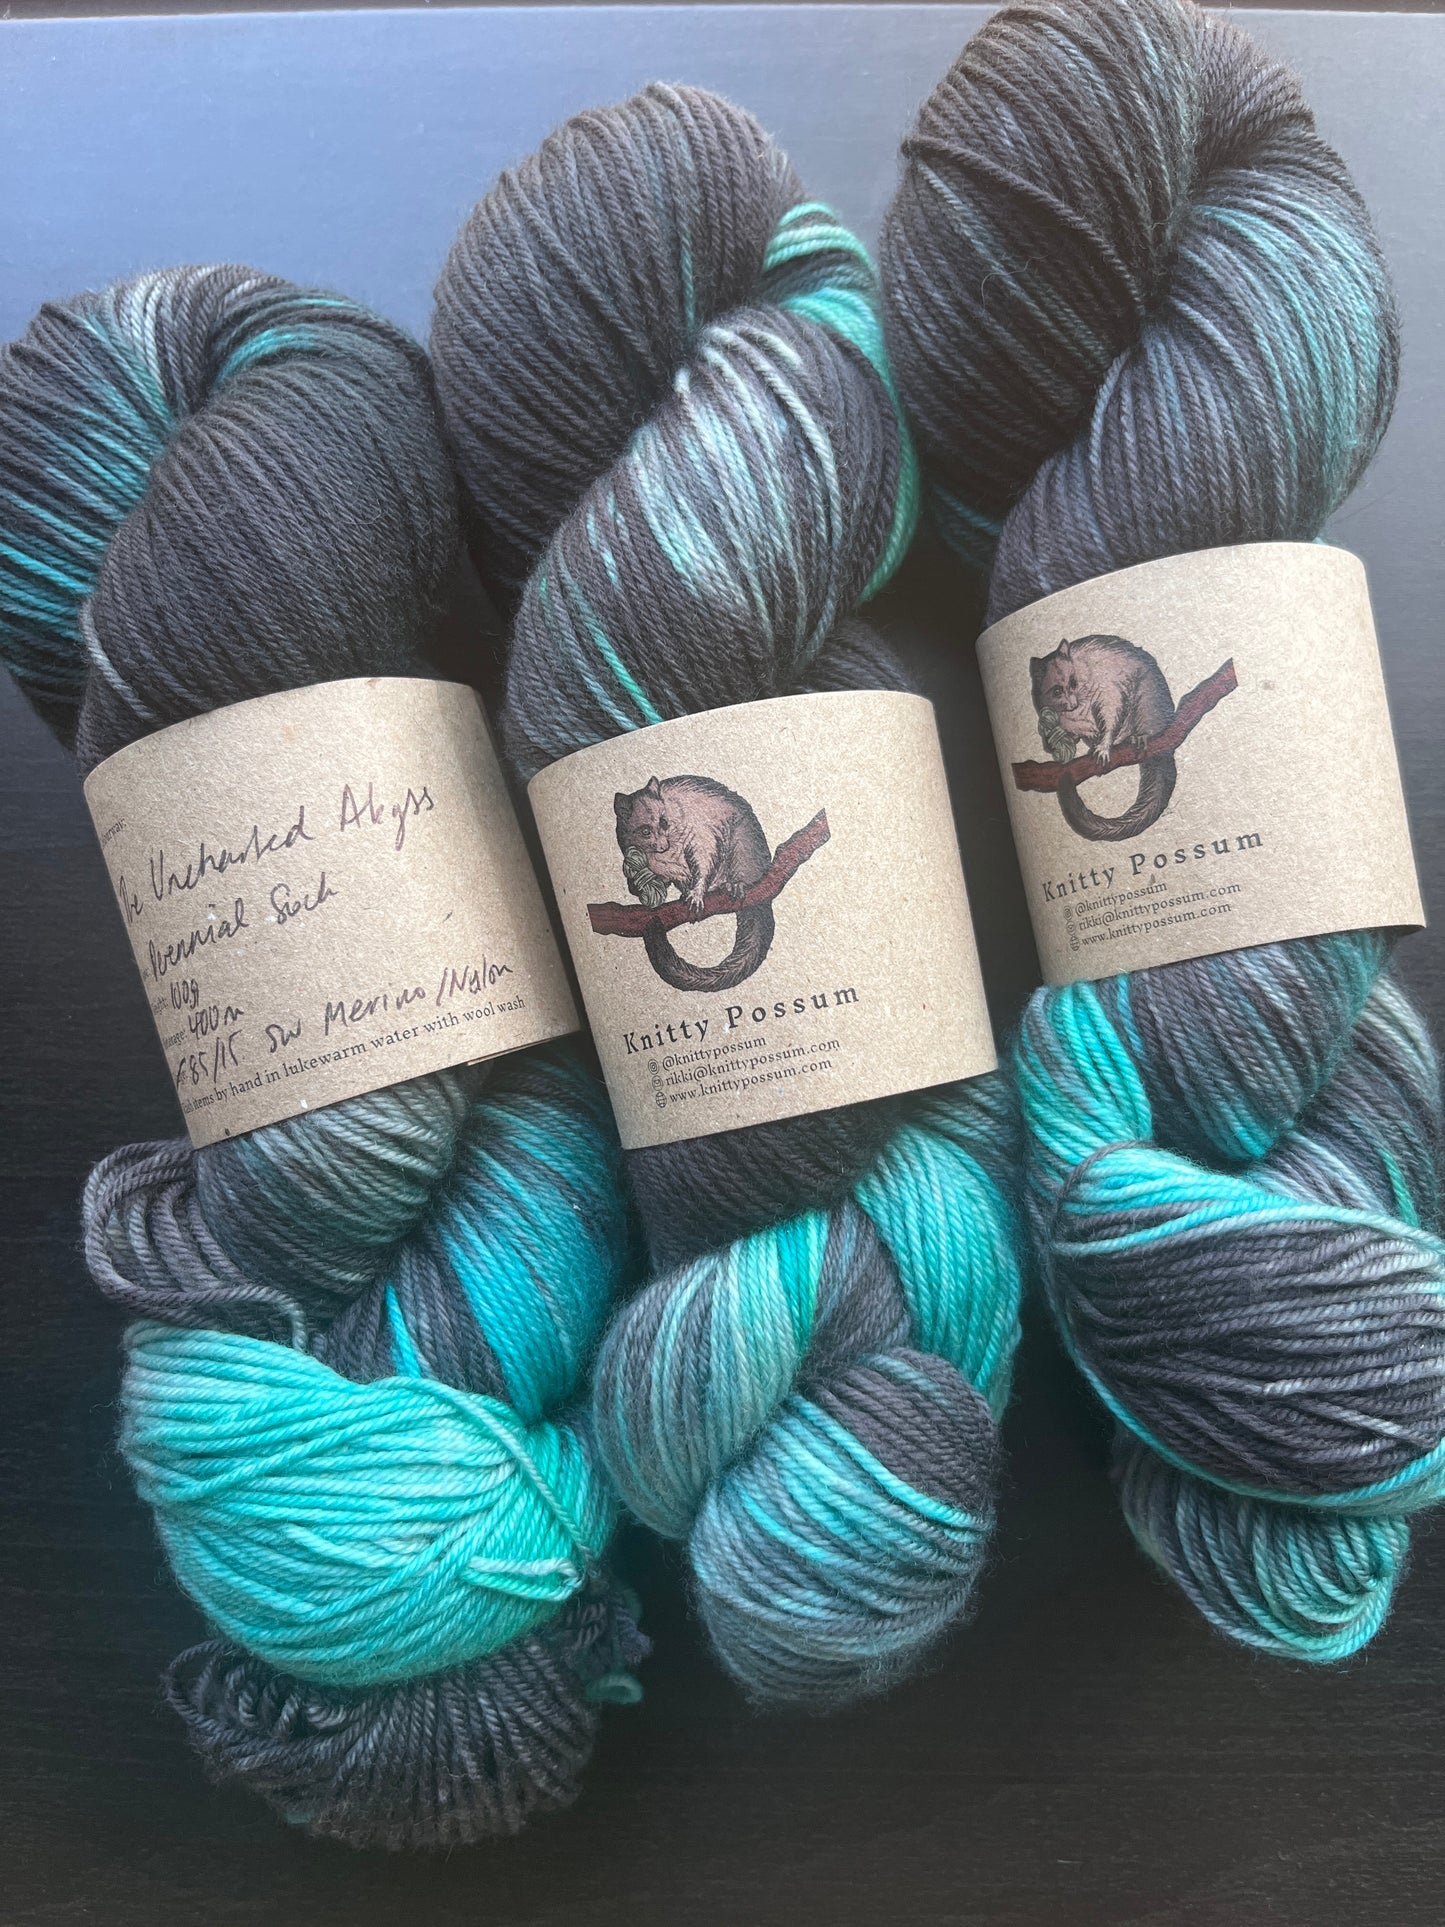 The Uncharted Abyss - Perennial Sock